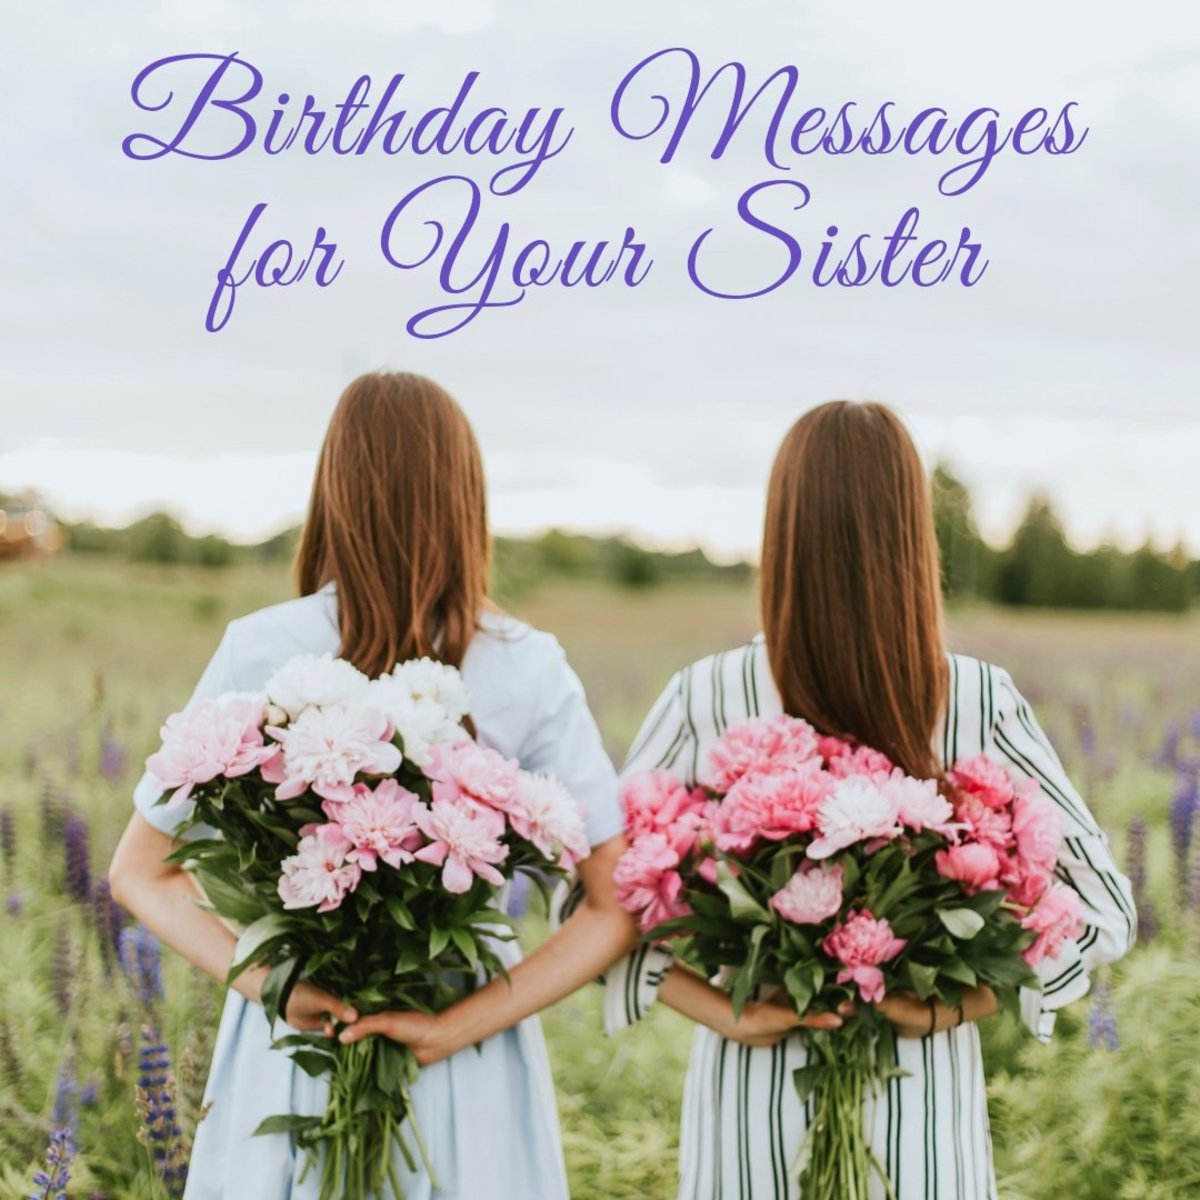 Birthday Wishes for a Sister: Messages and Poems